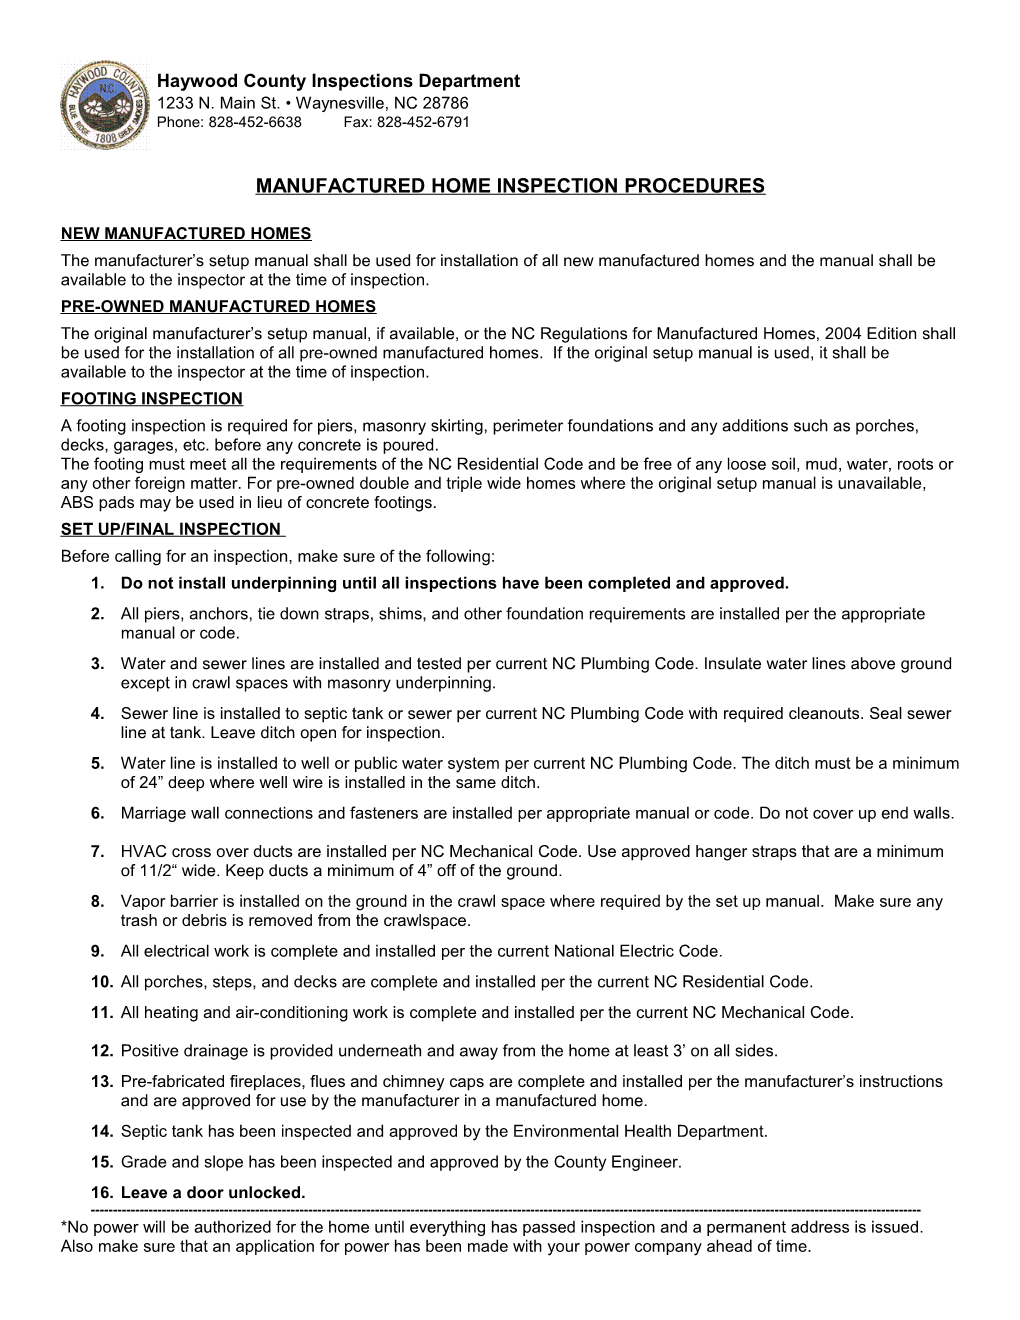 Manufactured Home Inspections Procedures